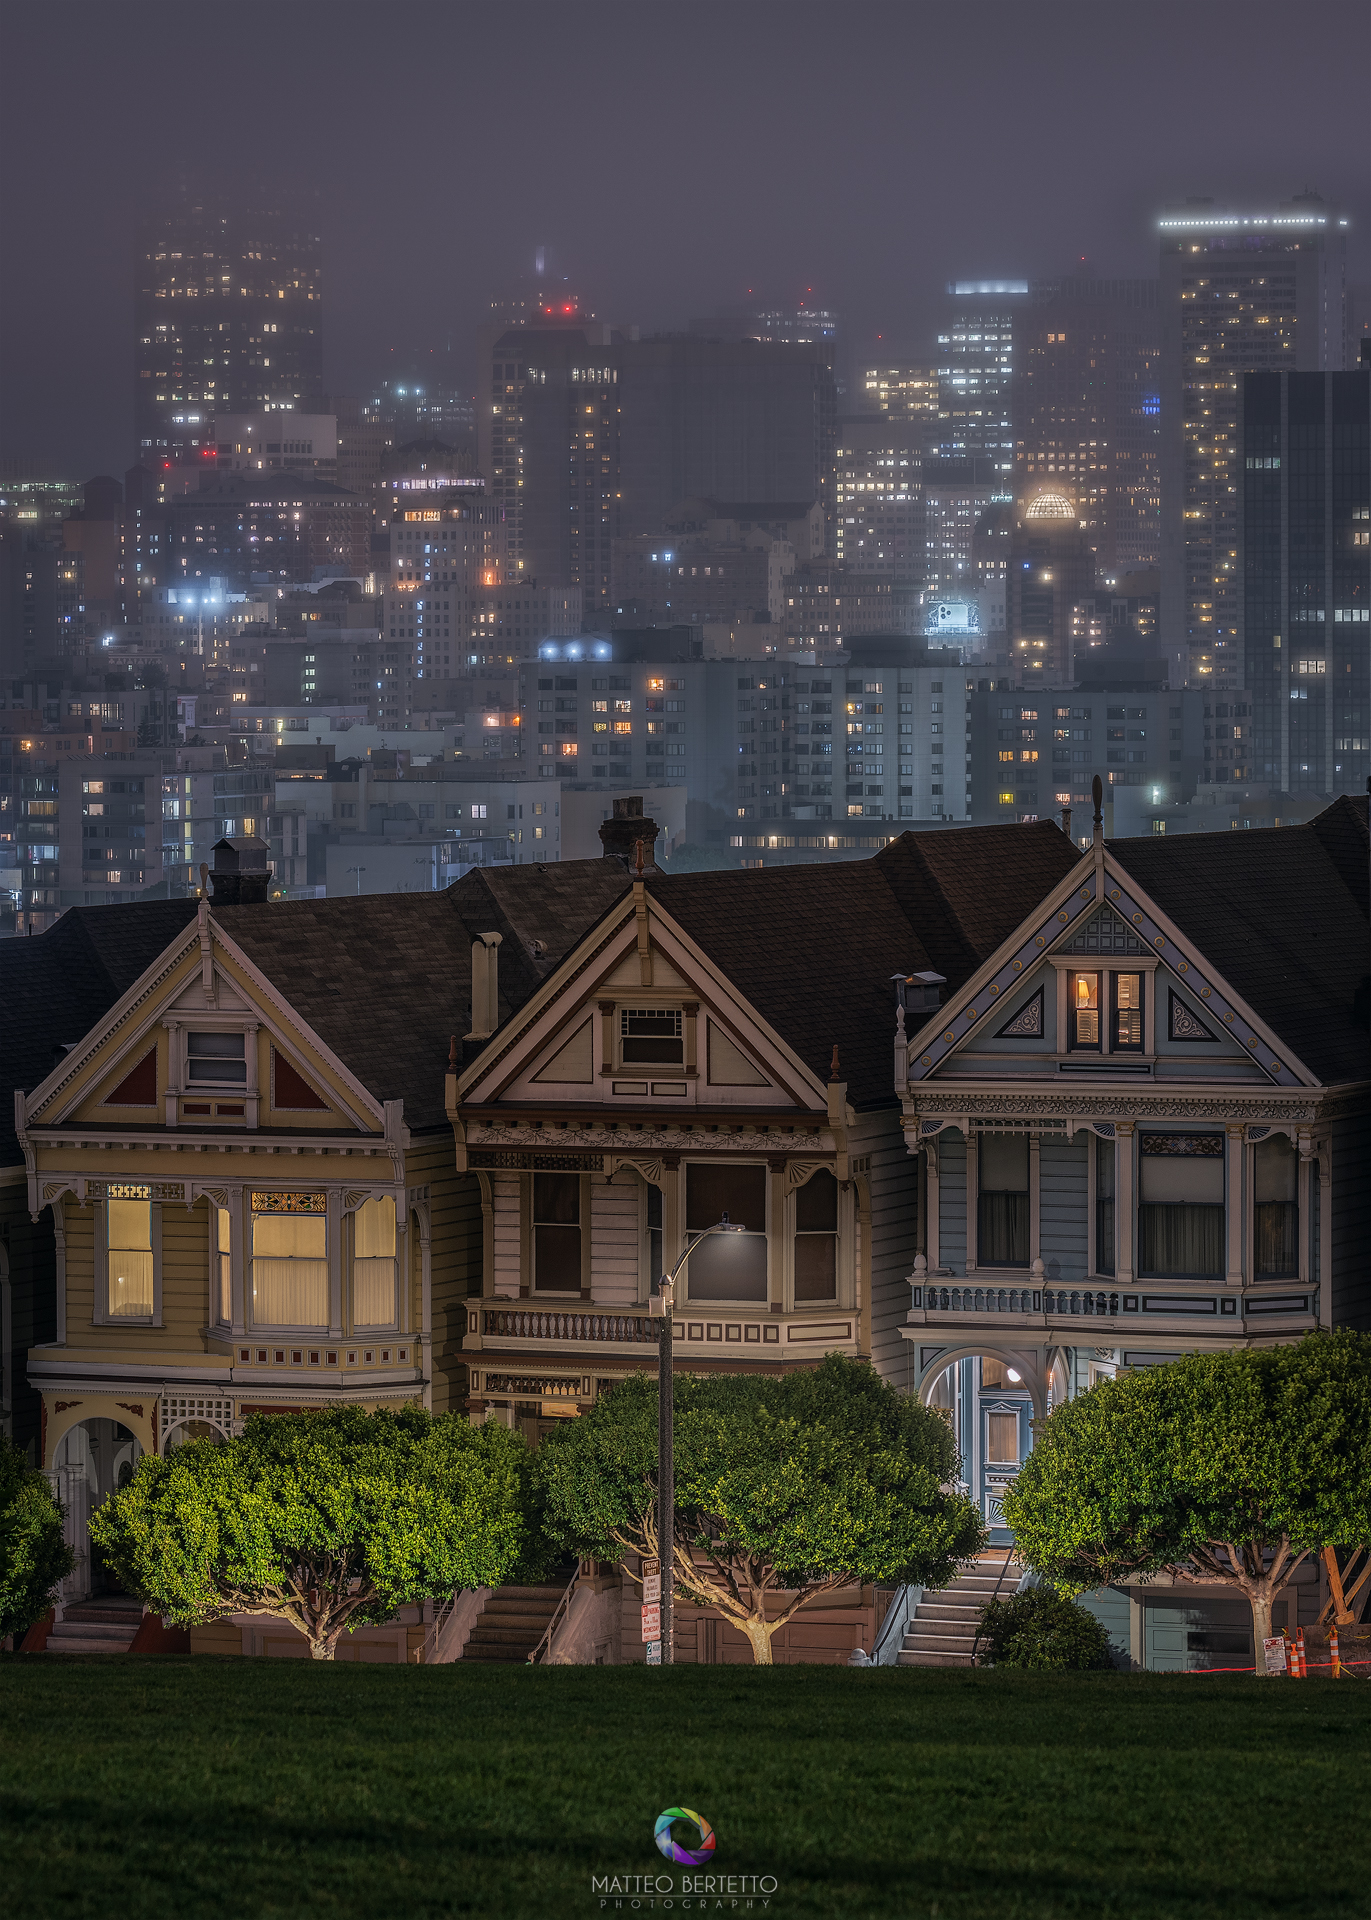 The Painted Ladies from San Francisco ...